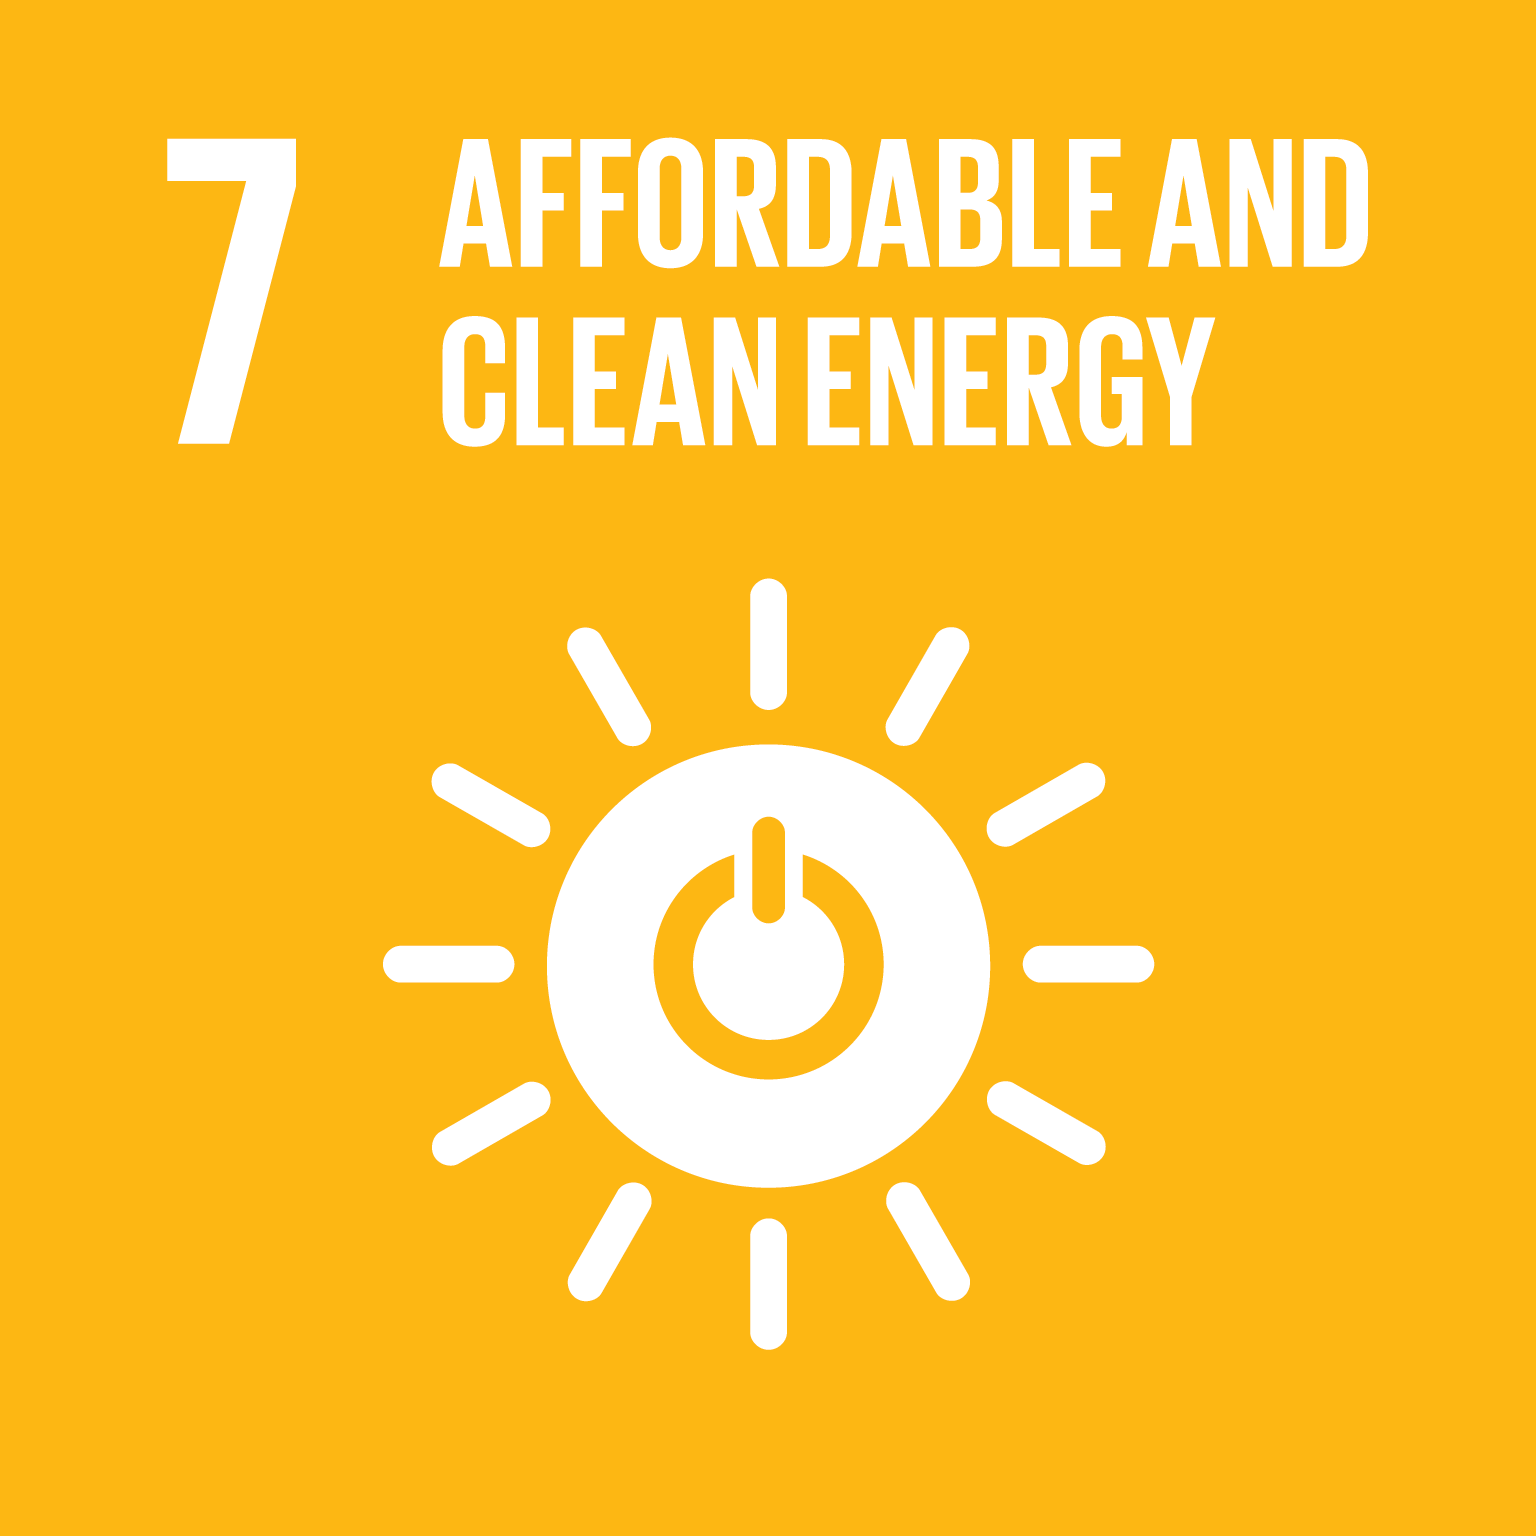 Goal 7: Affordable and Clean Energy - Ensure access to affordable, reliable, sustainable and modern energy for all